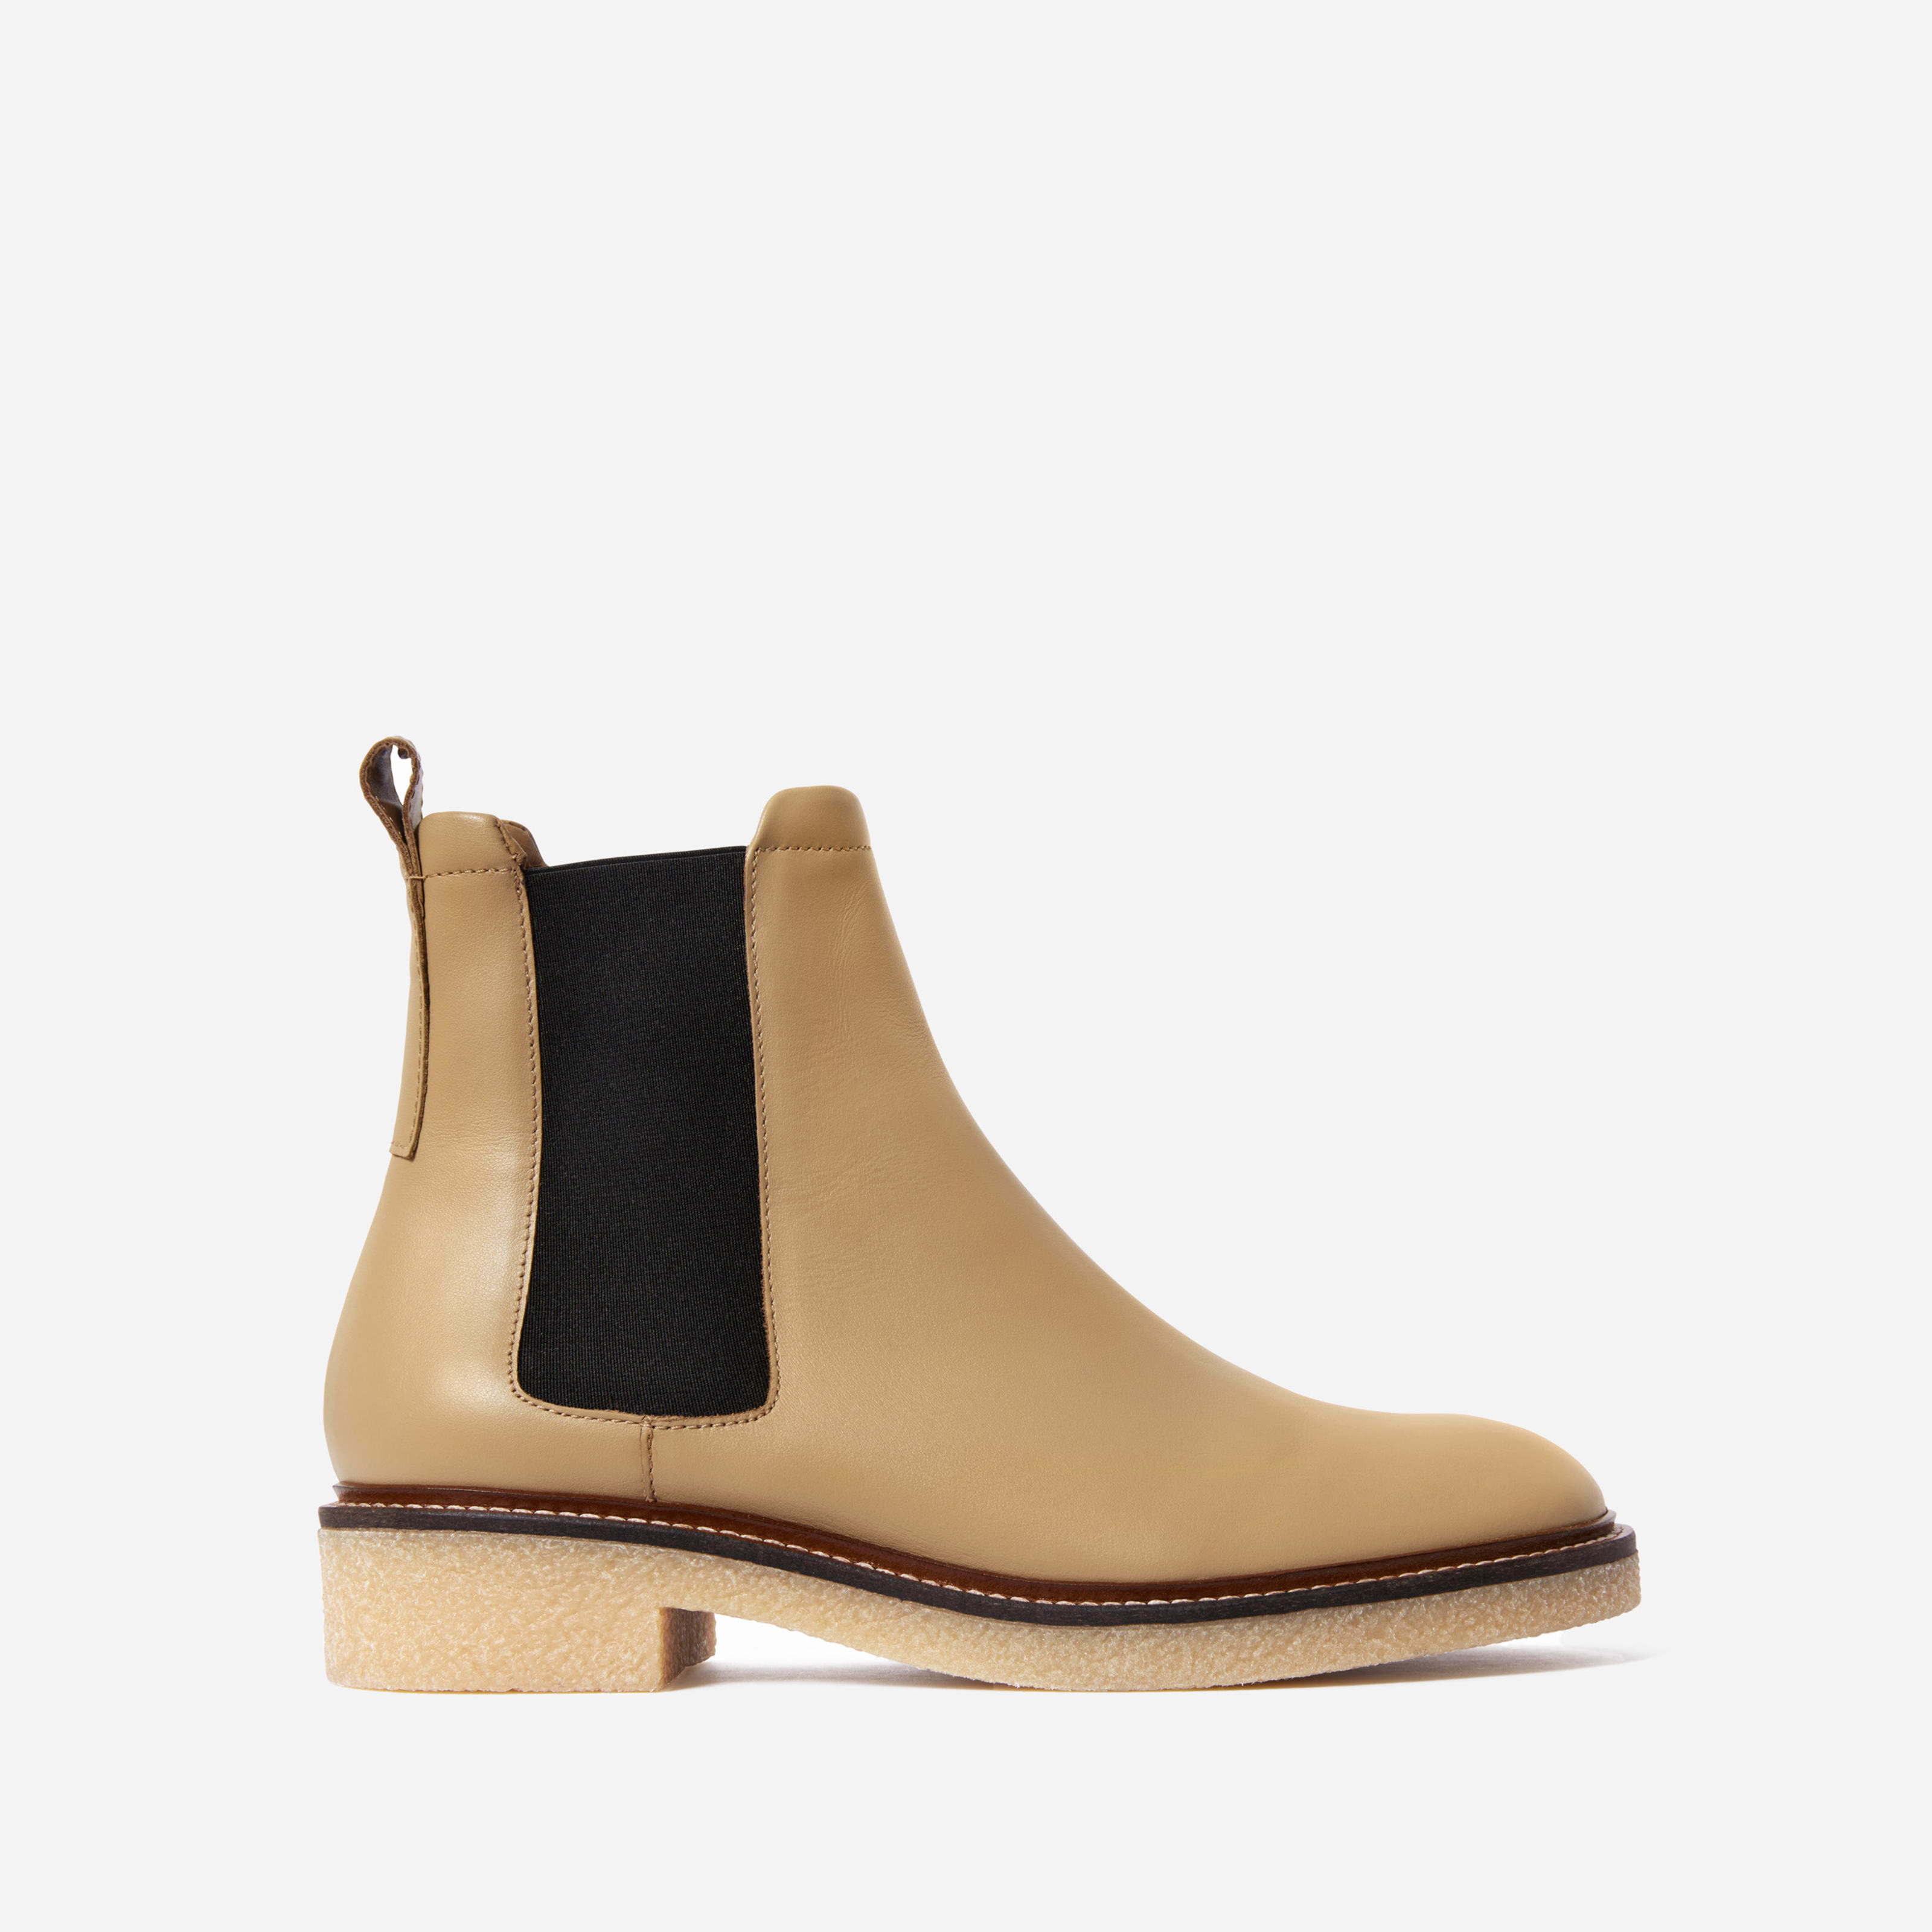 chelsea boot by everlane in biscuit, size 5